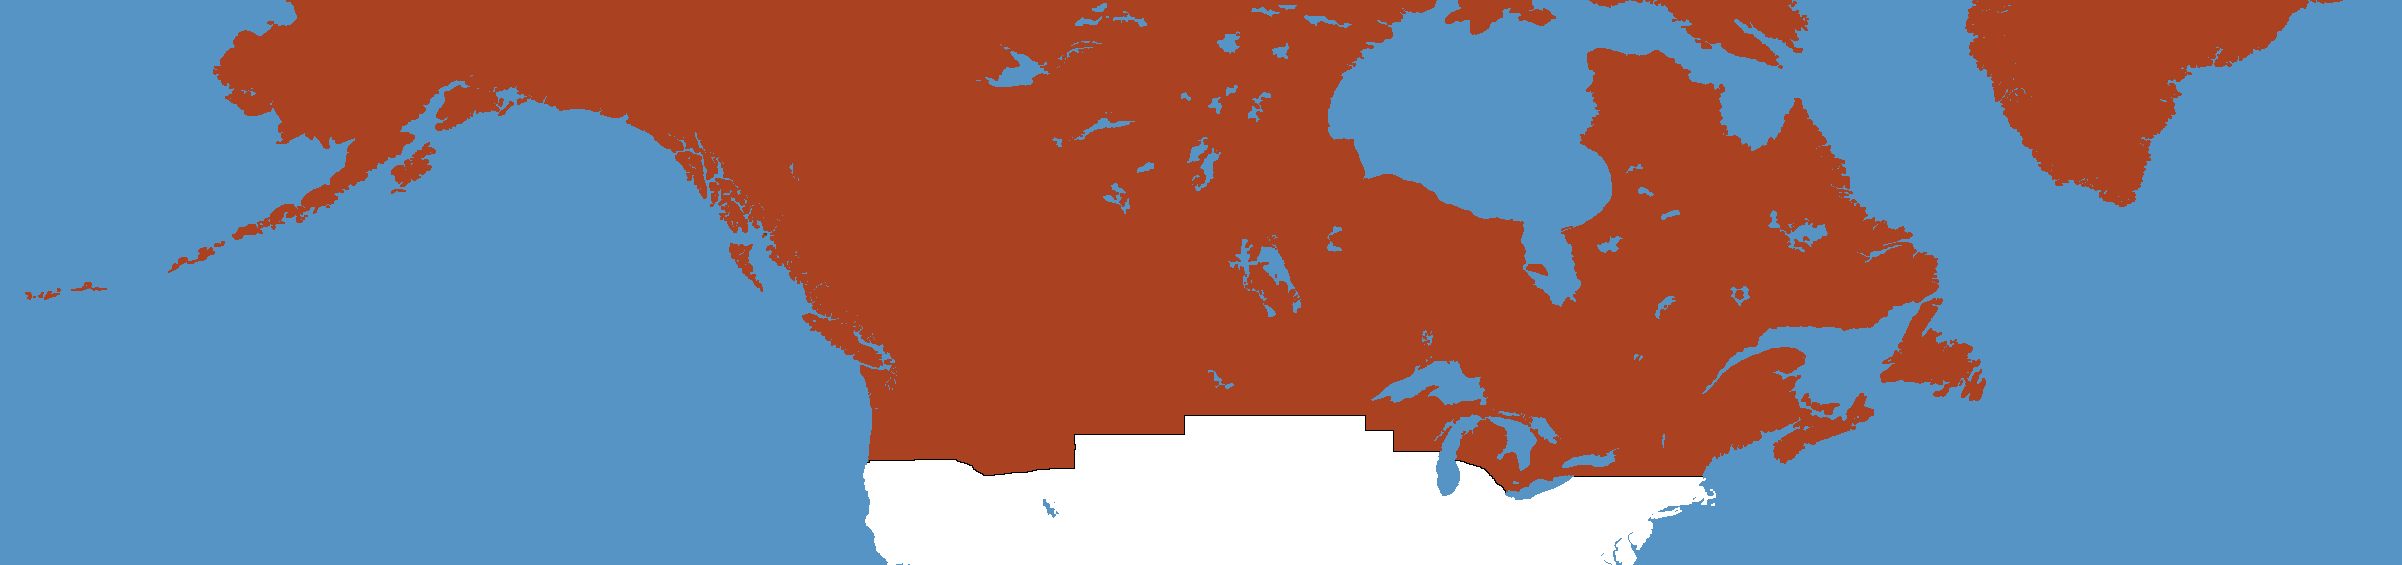 Gr8r Canada.png